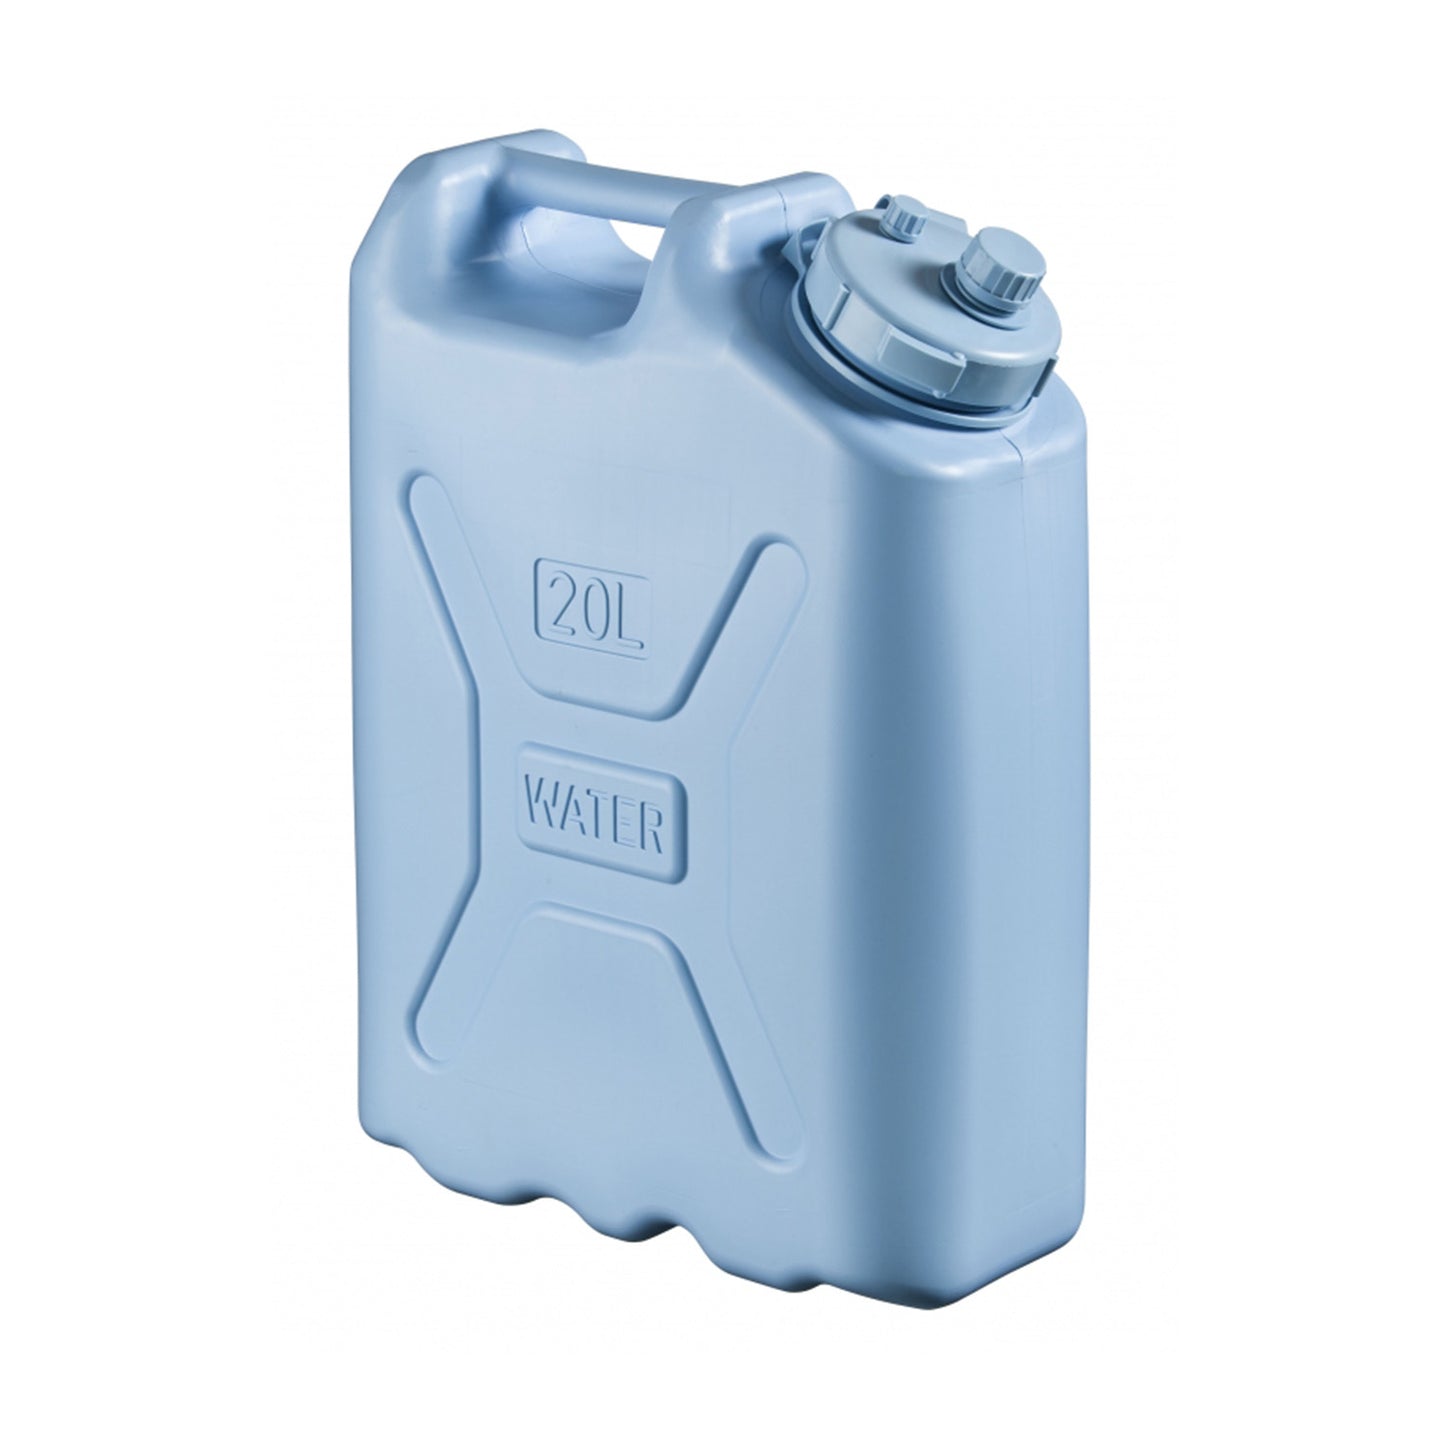 MIL-SPEC Water Jerry Can 20L